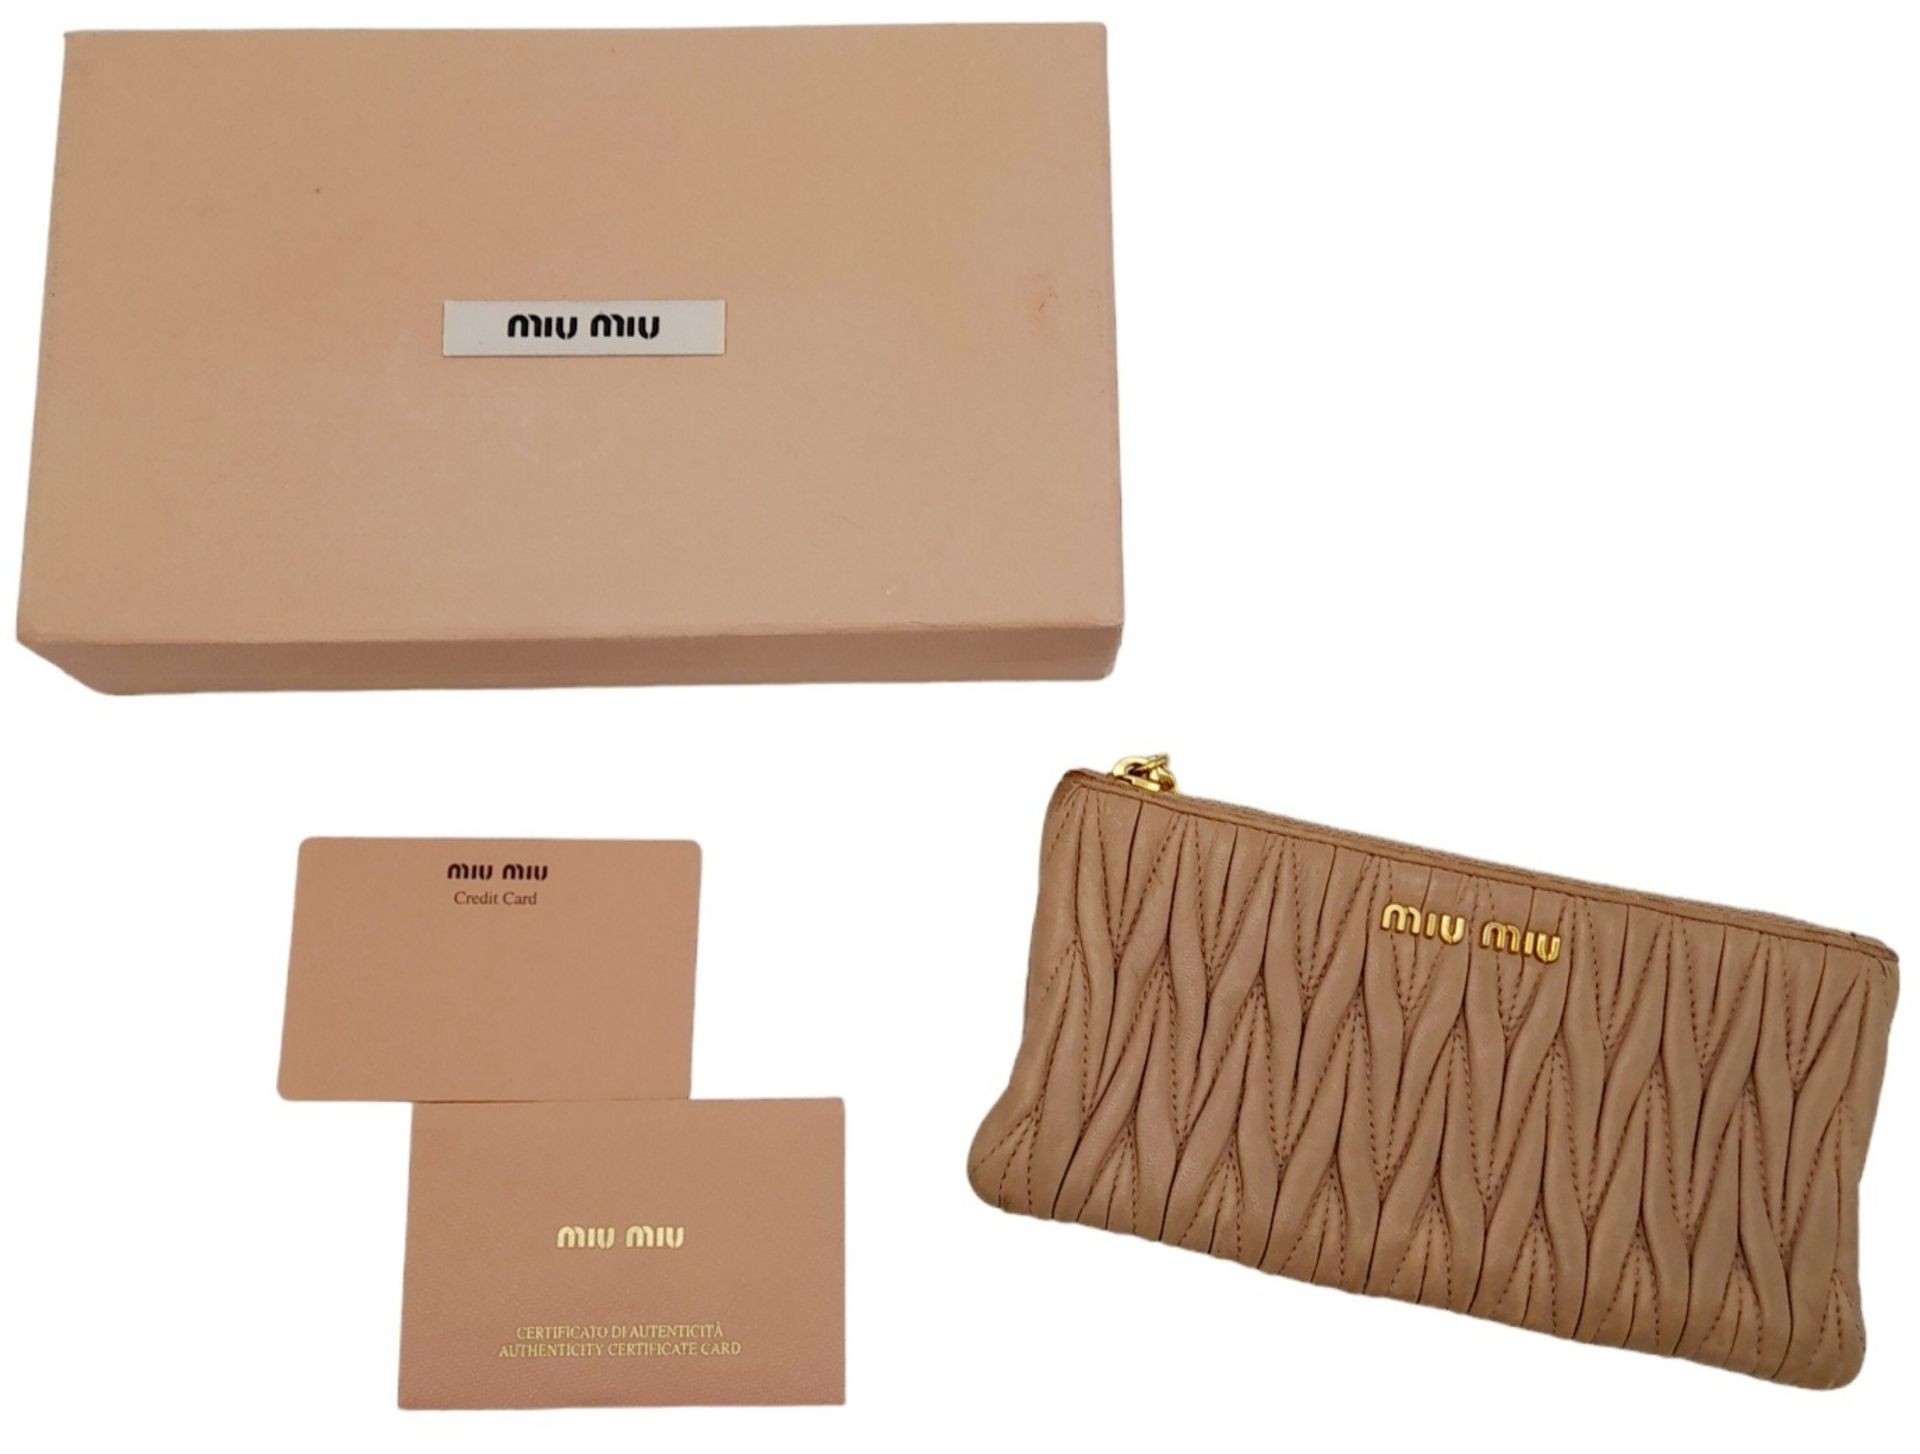 A Miu Miu Dust Pink Purse. Matelassé leather exterior with gold-toned hardware and zipped top - Image 10 of 10